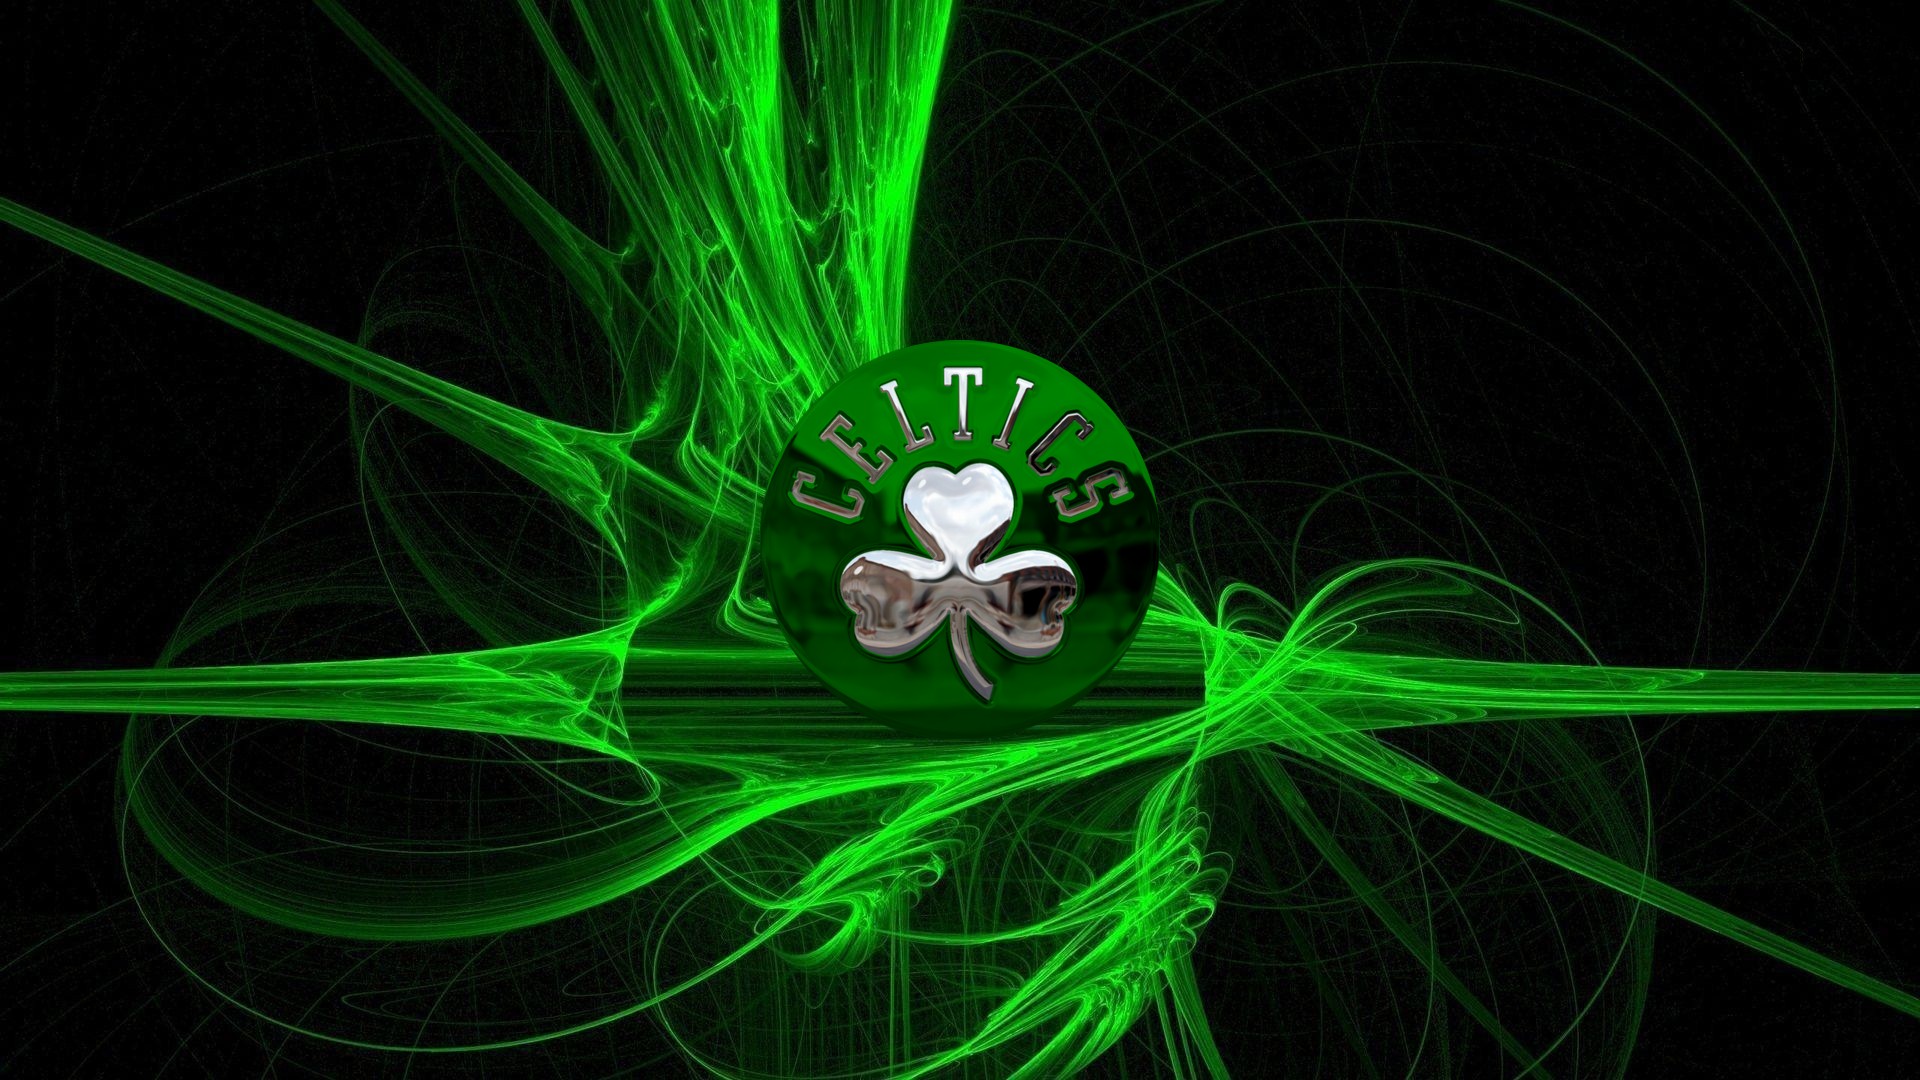 Wallpaper HD Boston Celtics Logo with image resolution 1920x1080 pixel. You can make this wallpaper for your Desktop Computer Backgrounds, Mac Wallpapers, Android Lock screen or iPhone Screensavers